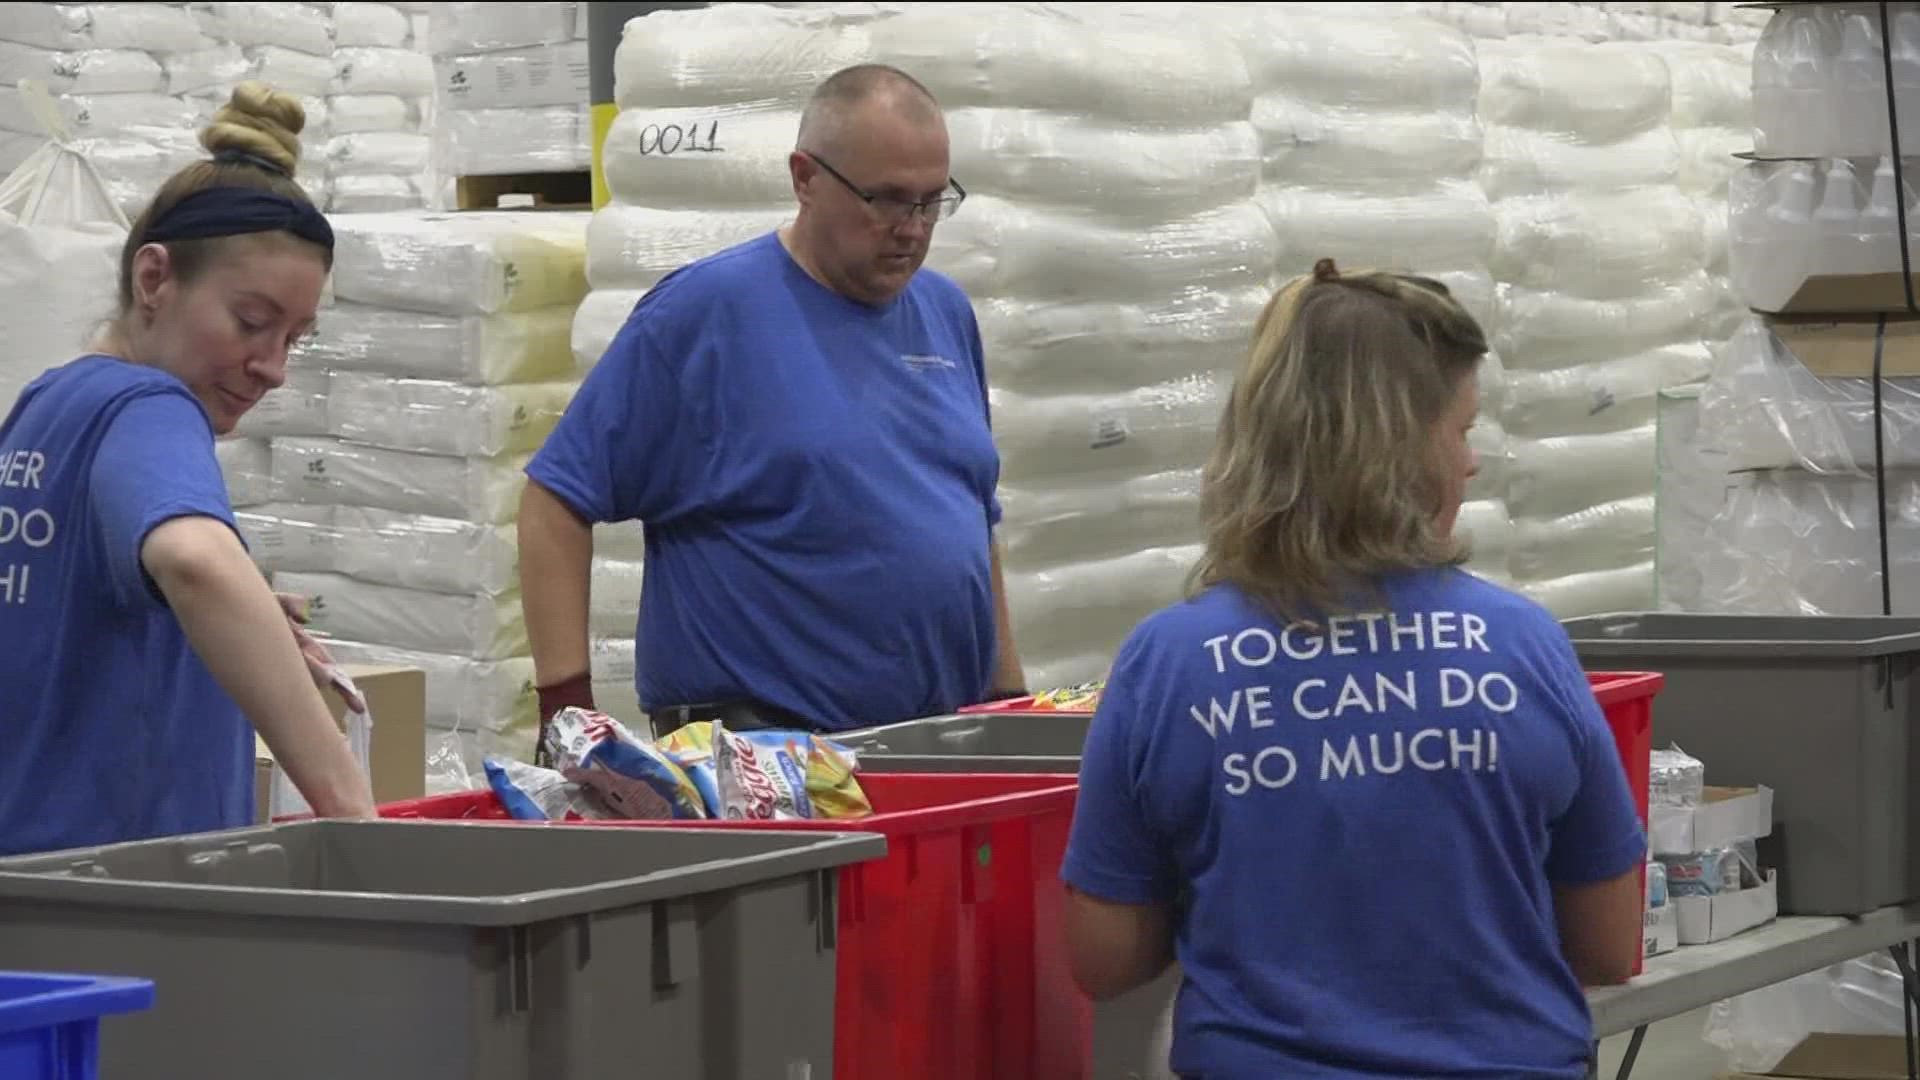 On average, the non-profit hands out about 500 meals a week to local elementary students.